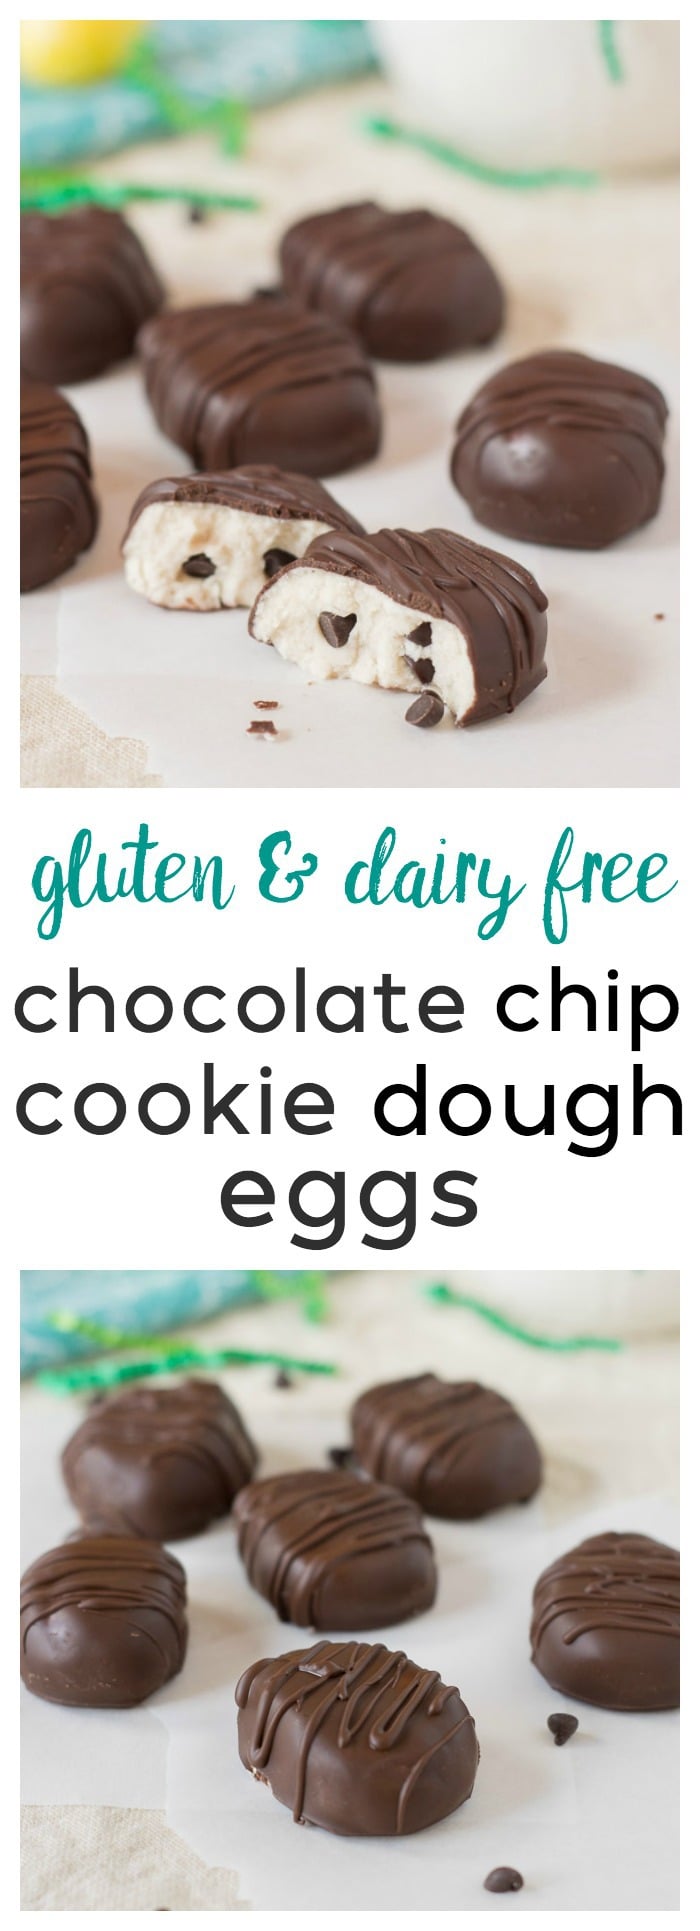 photo collage with text showing chocolate covered cookie dough eggs for Easter. 